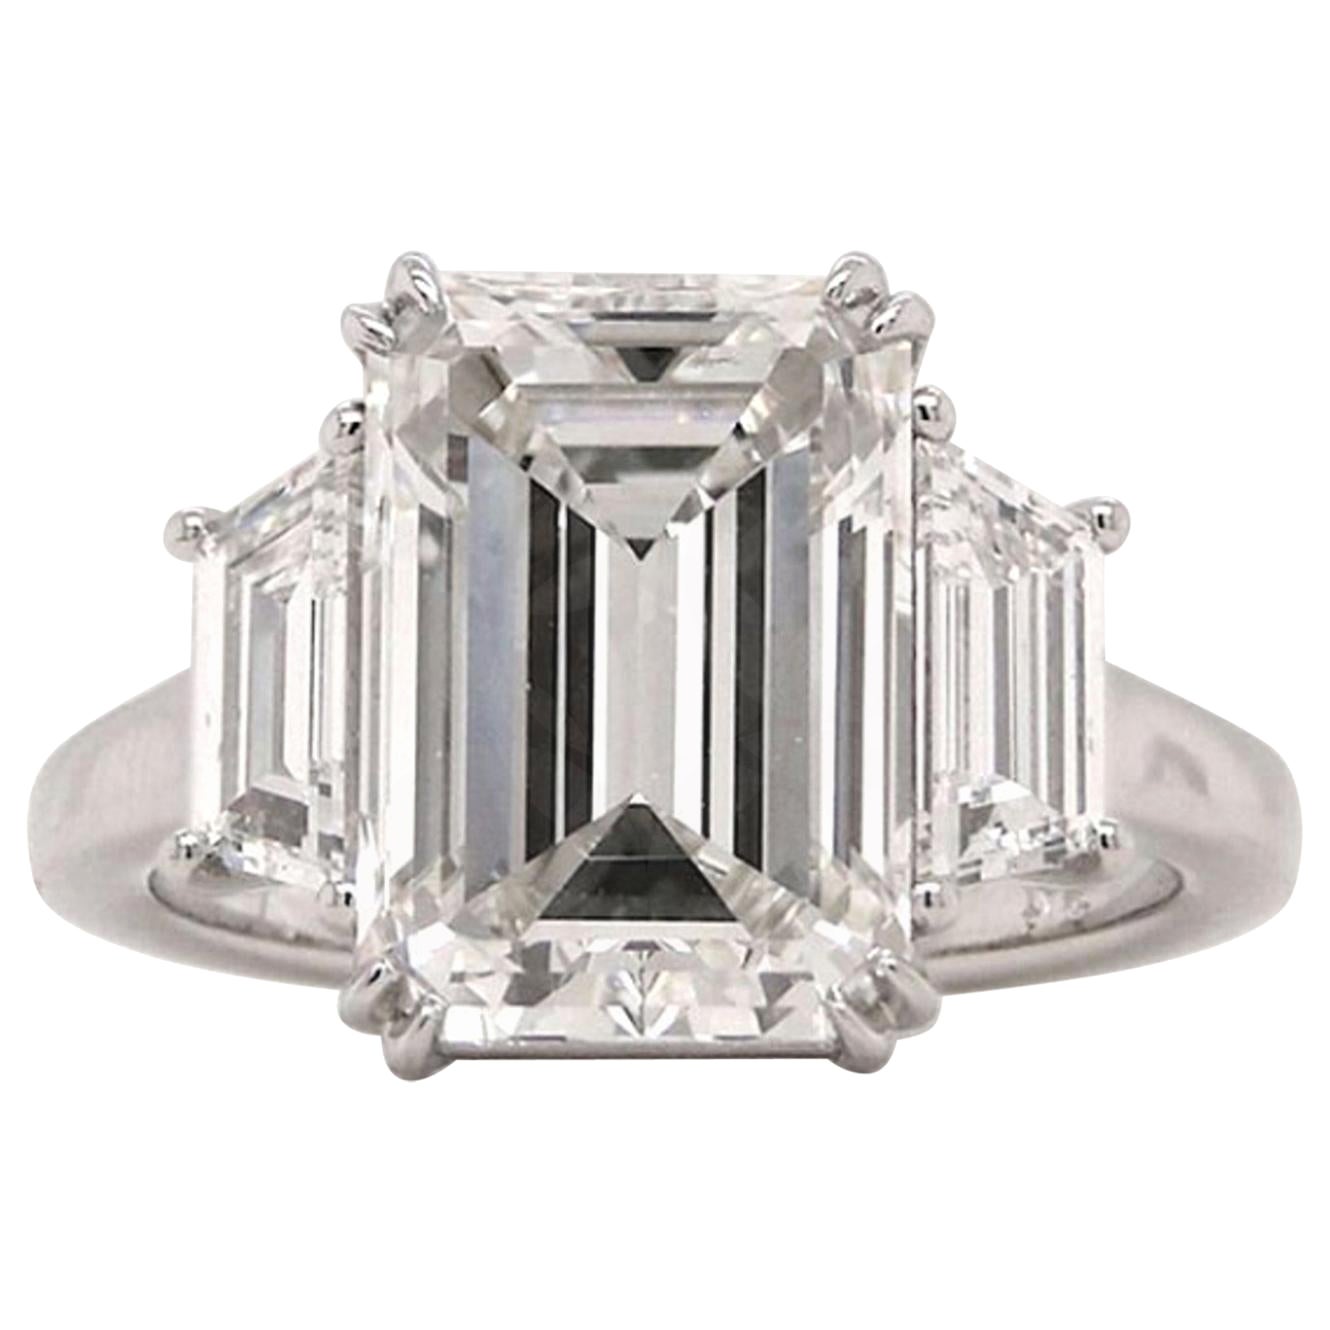 Exceptional GIA Certified 4.02 Carat Excellent Cut Emerald Cut Diamond Ring For Sale